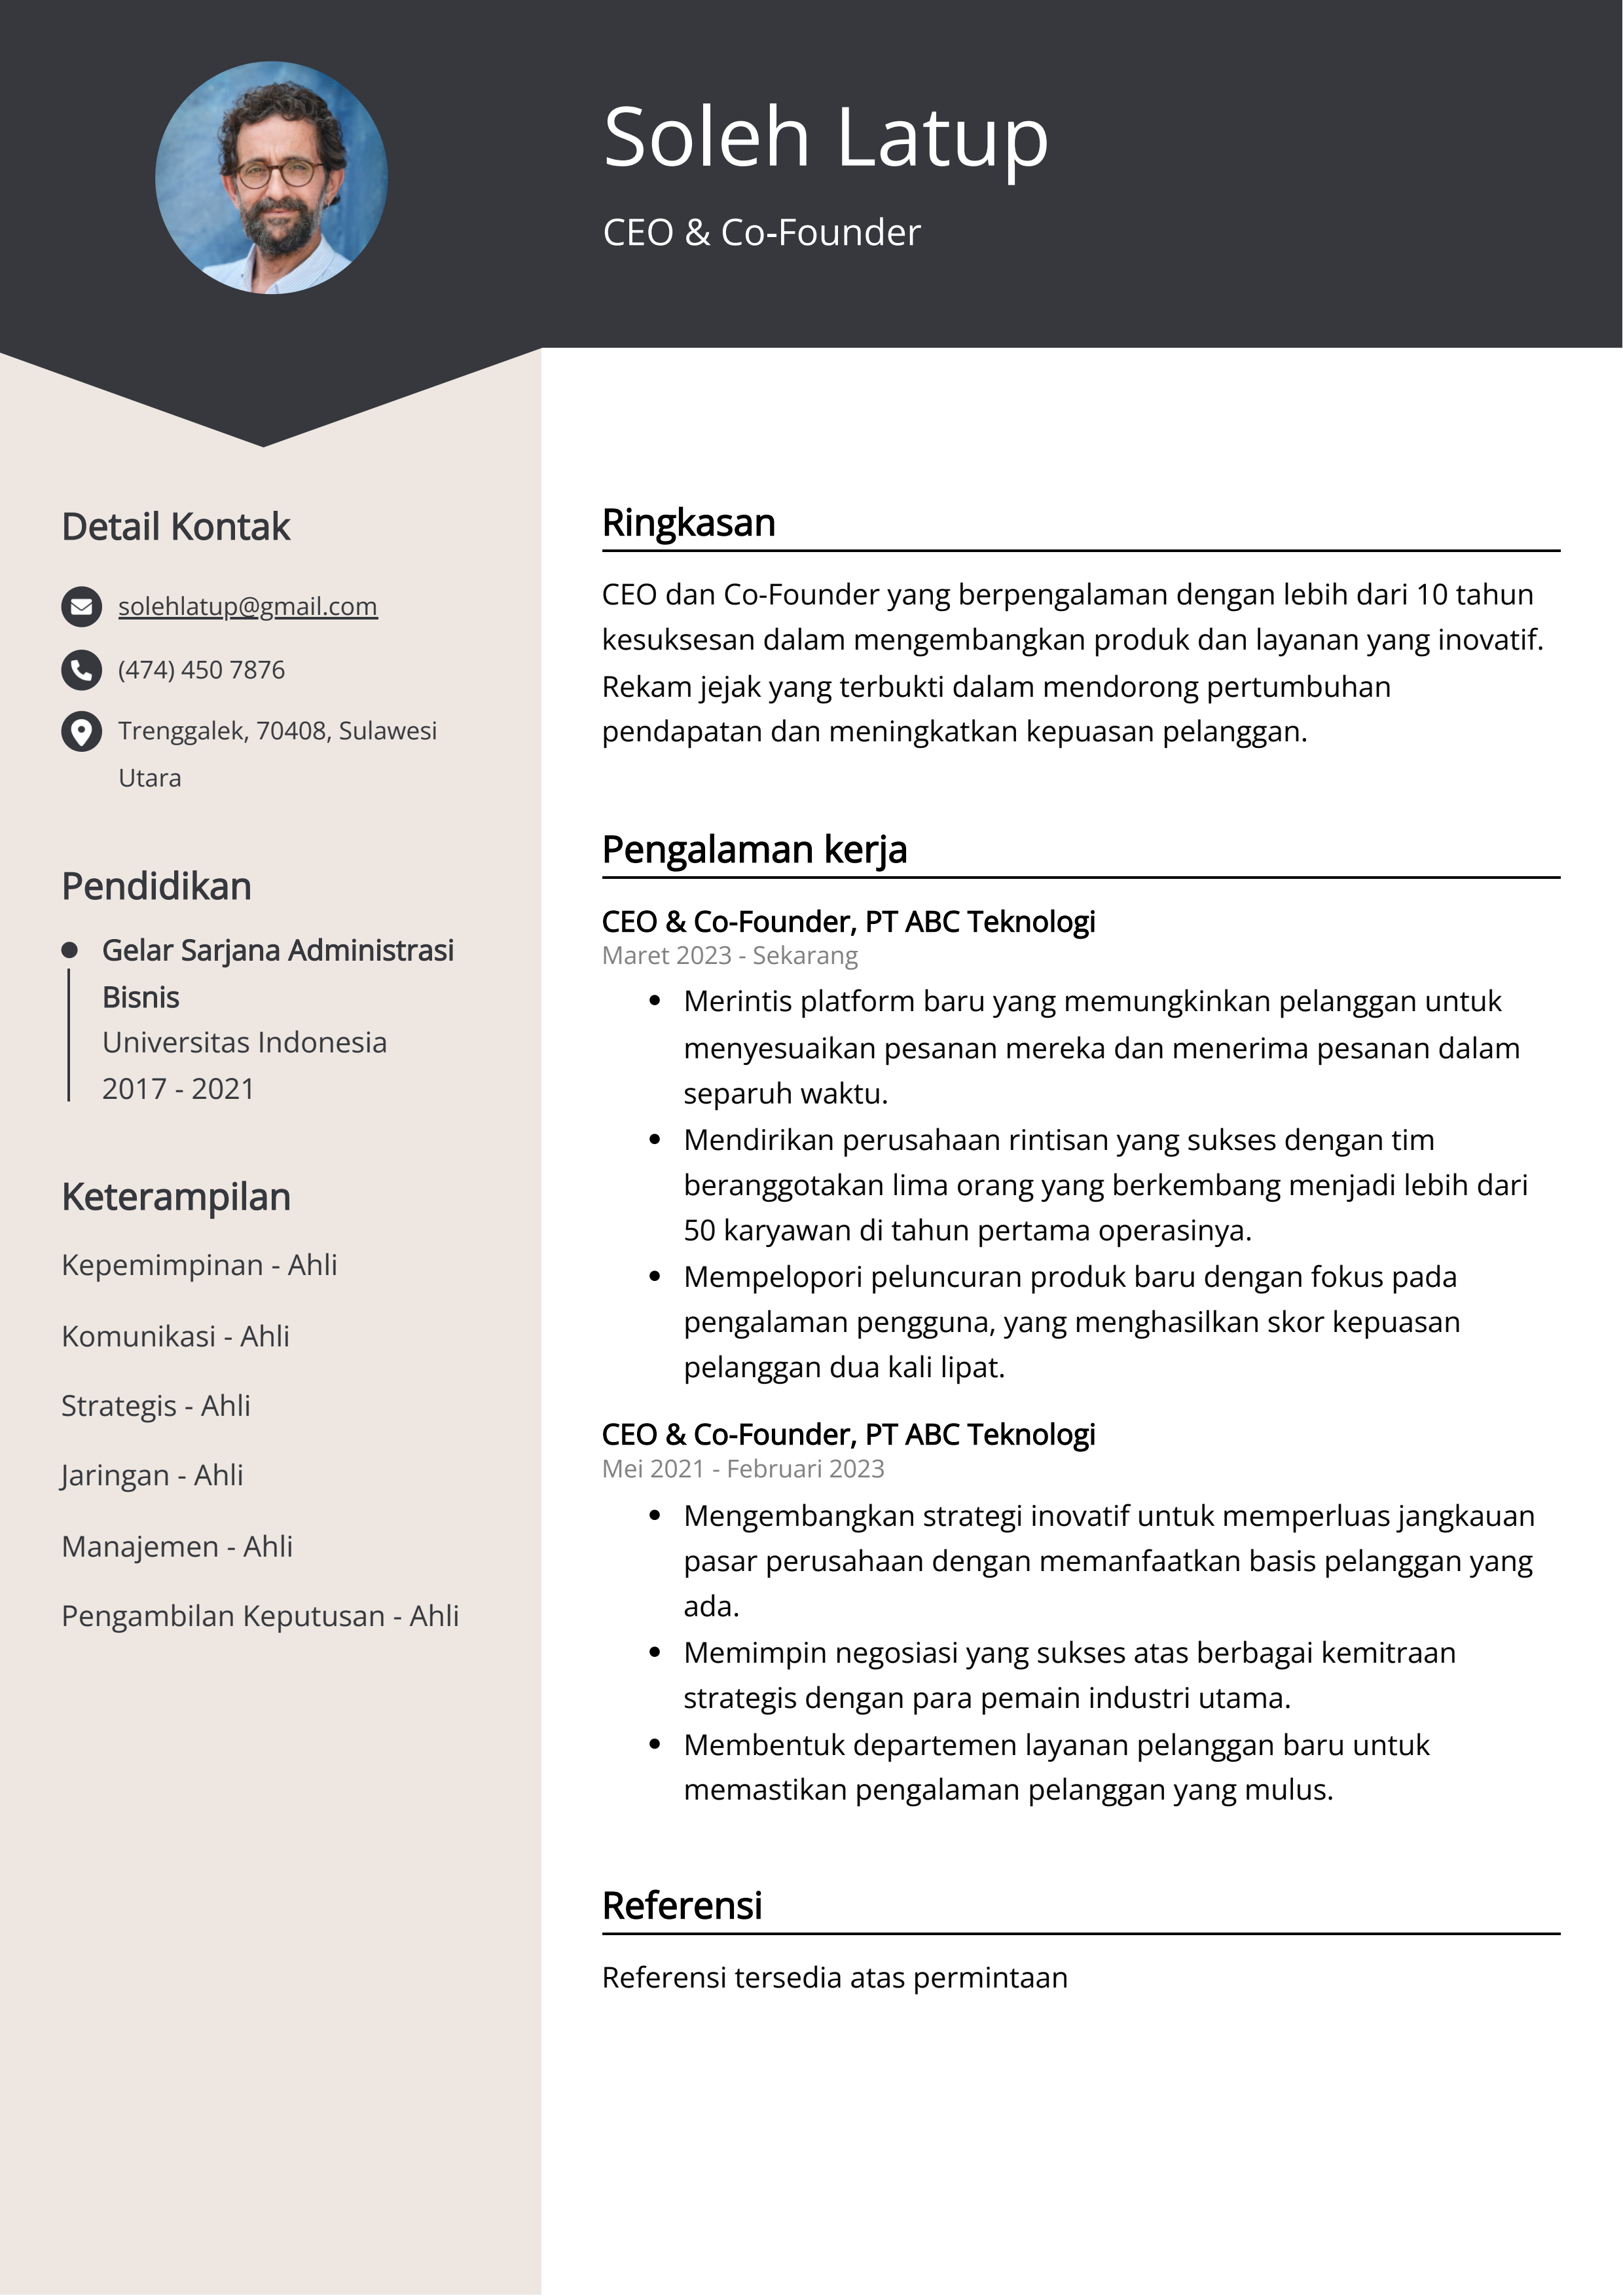 Contoh Resume CEO & Co-Founder